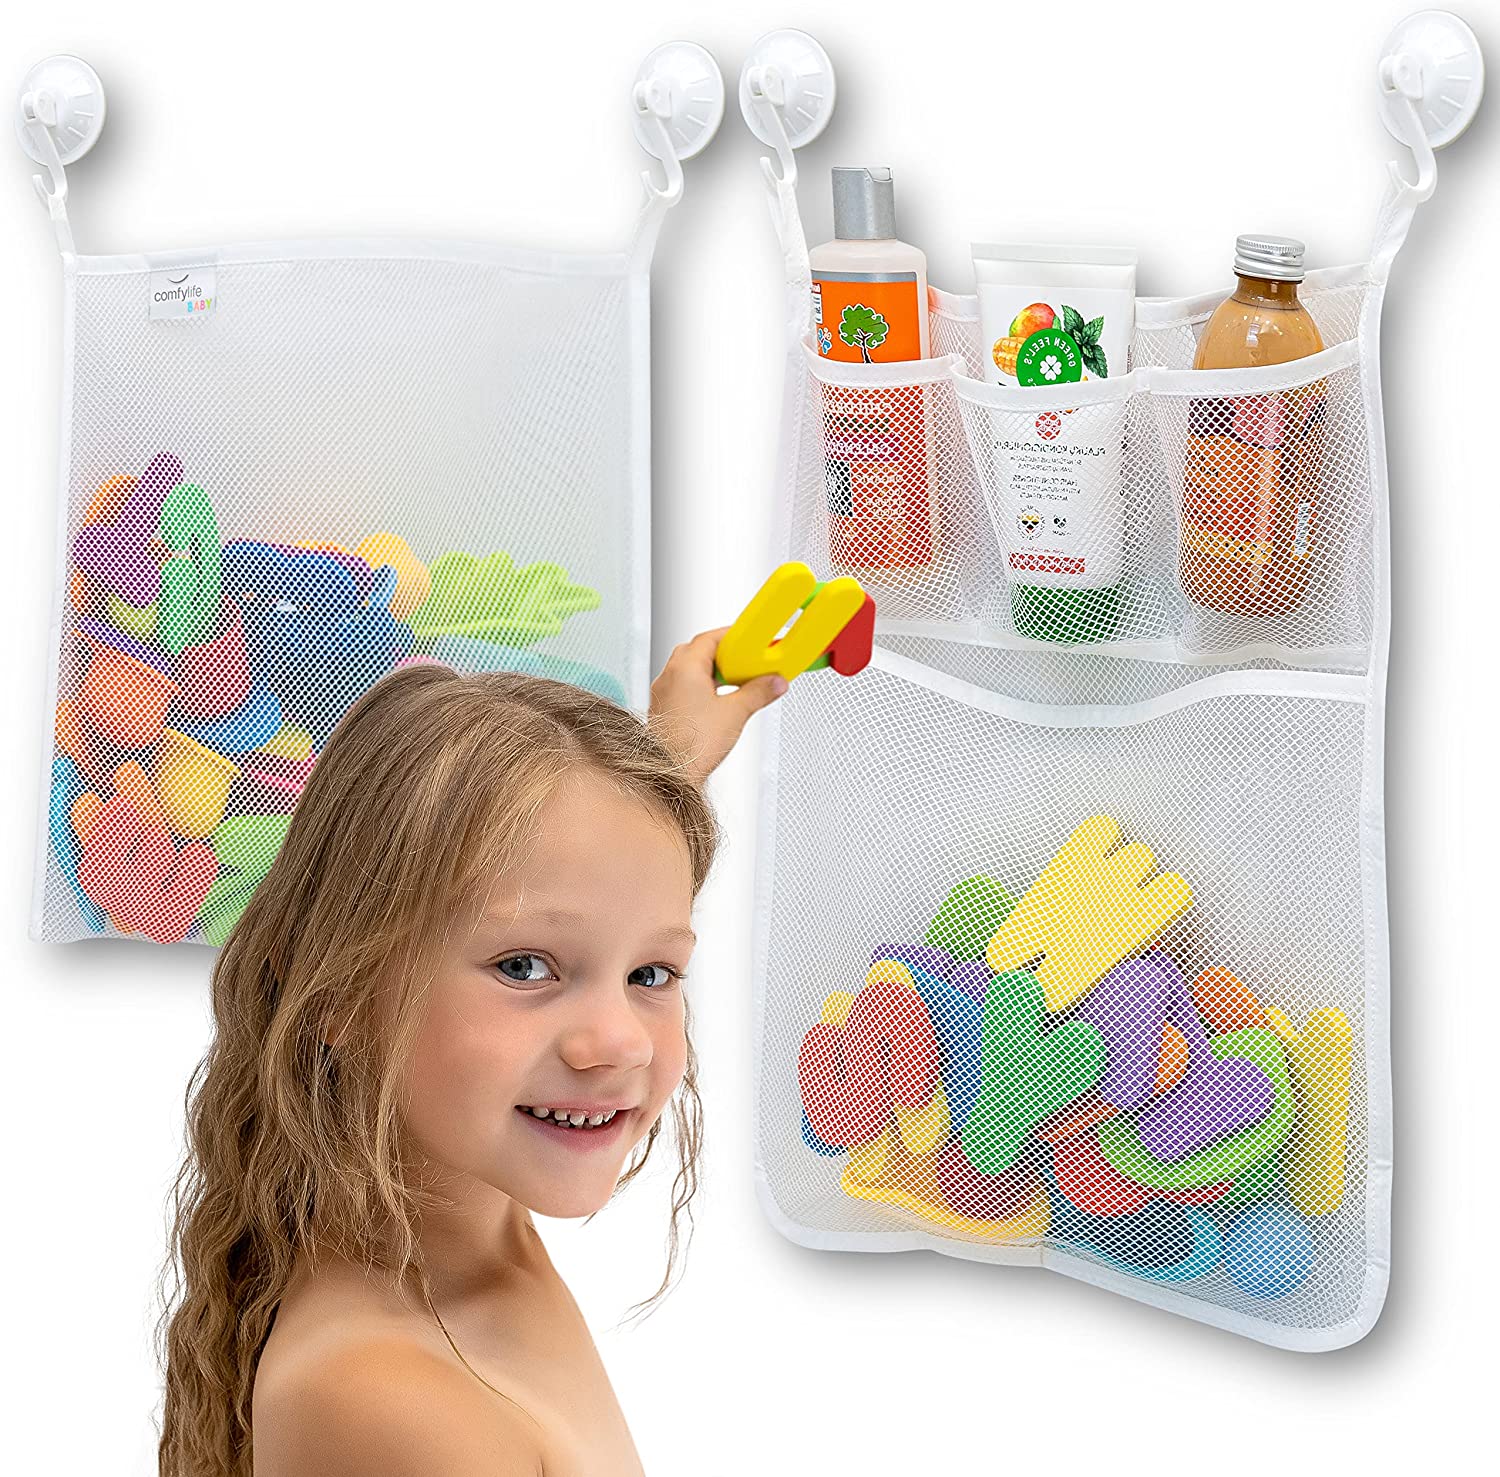  Tub Works® Smooth™ Bath Crayons Bath Toy, 12 Pack, Nontoxic,  Washable Bath Crayons for Toddlers & Kids, Unique Formula Draws Smoothly &  Vividly on Wet & Dry Tub Walls